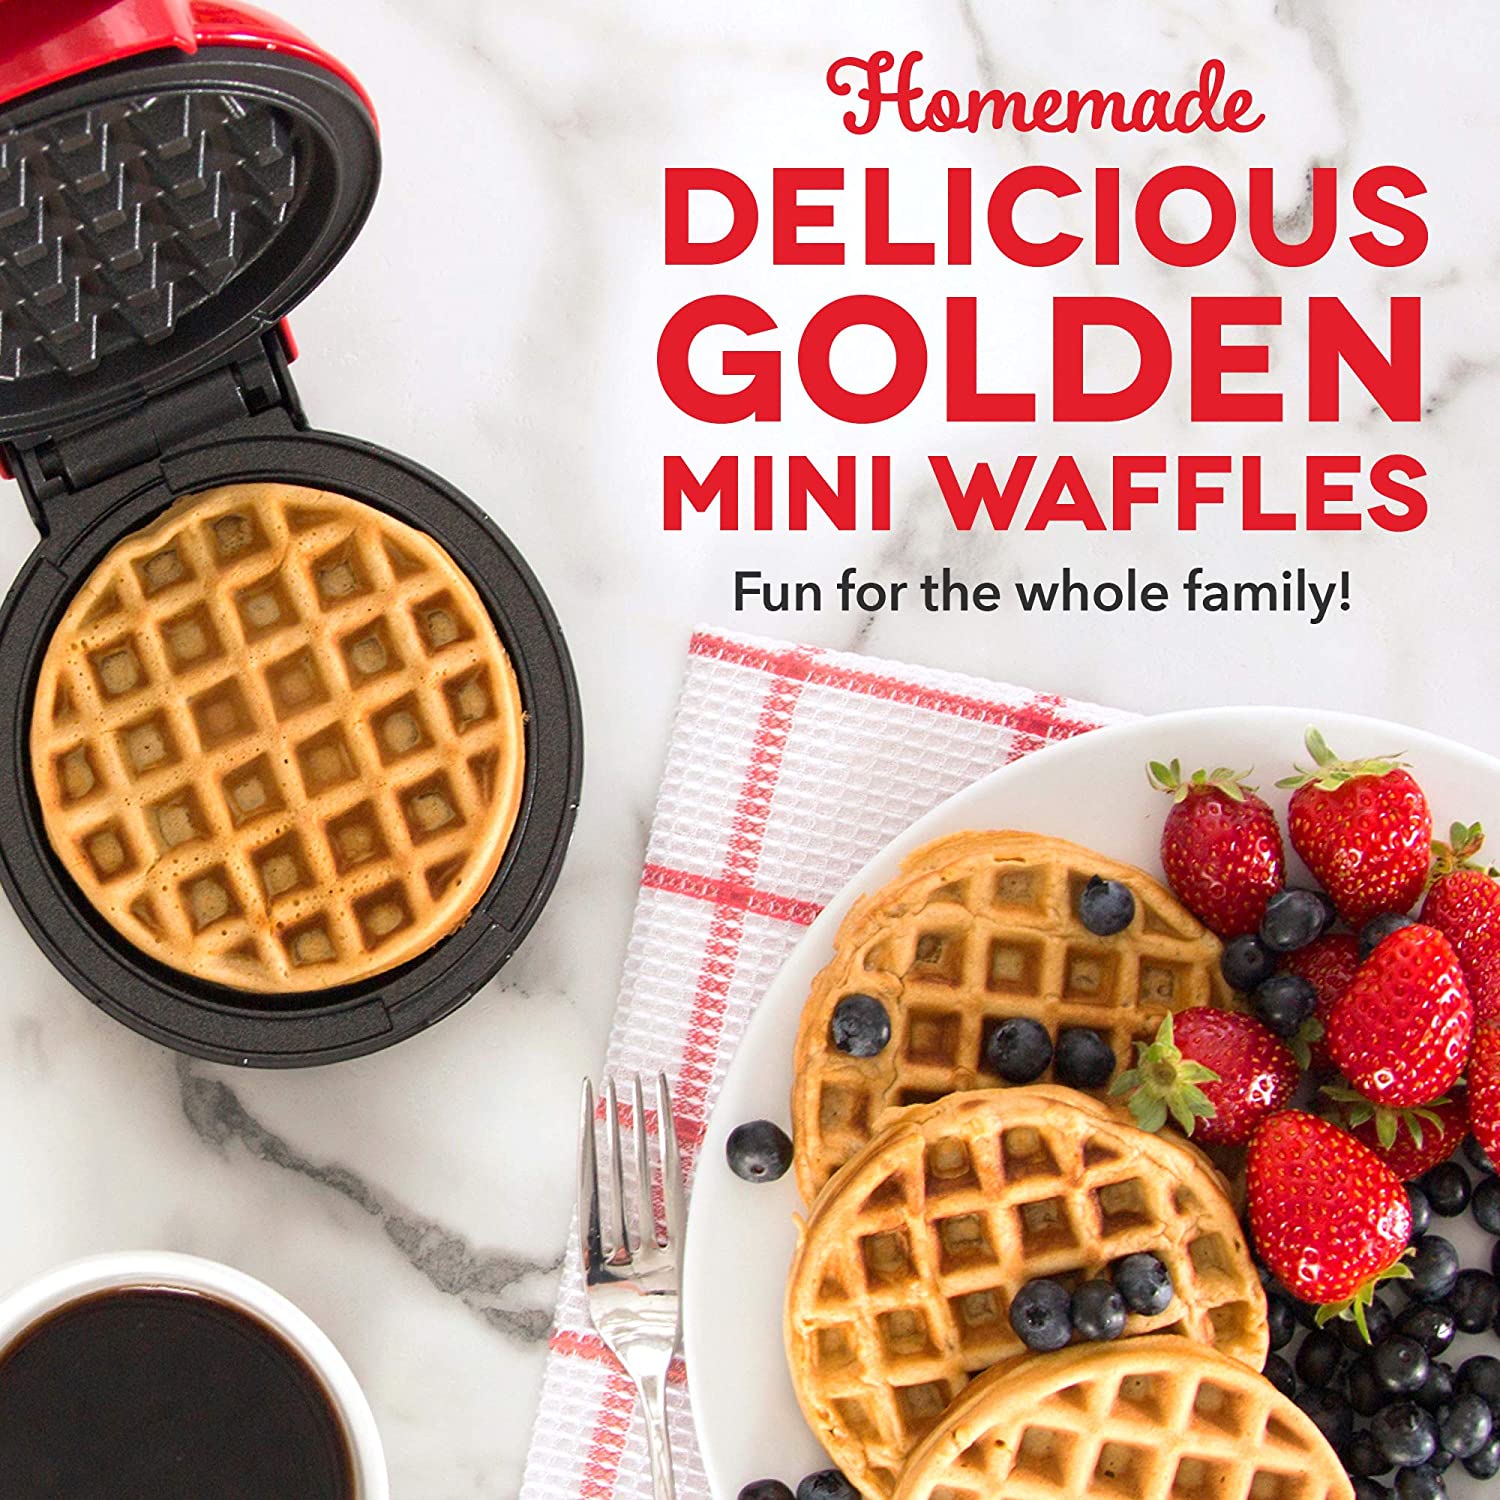 The Original Mini Waffle Maker - by Chef'd